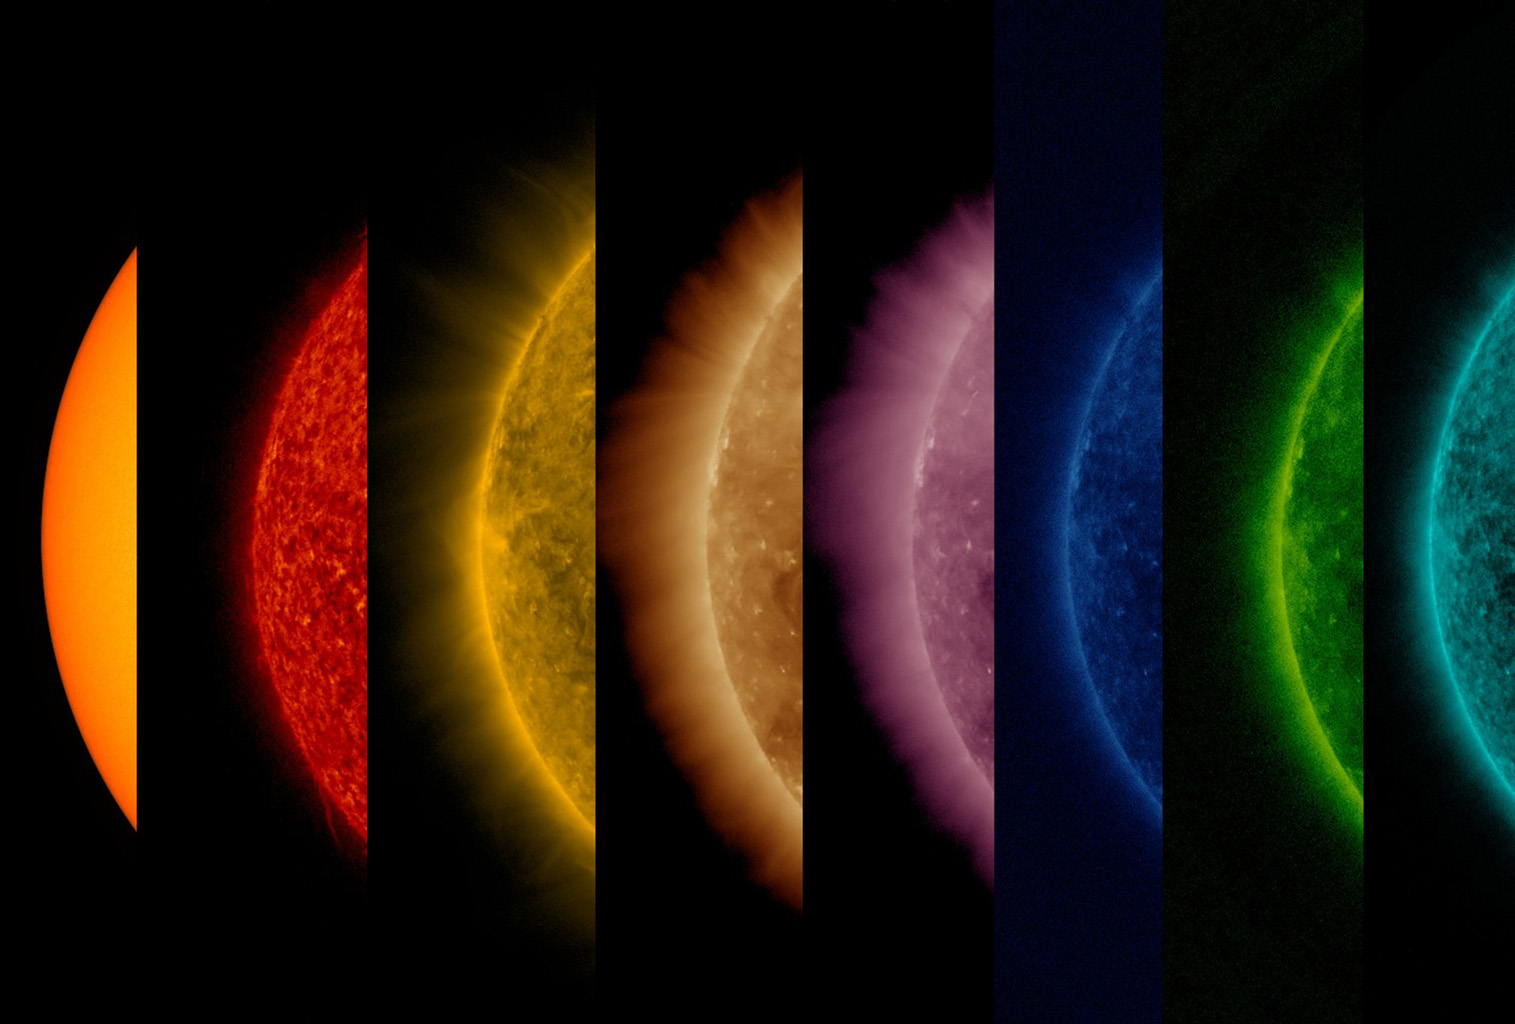 several views of sun in different wavelengths of light